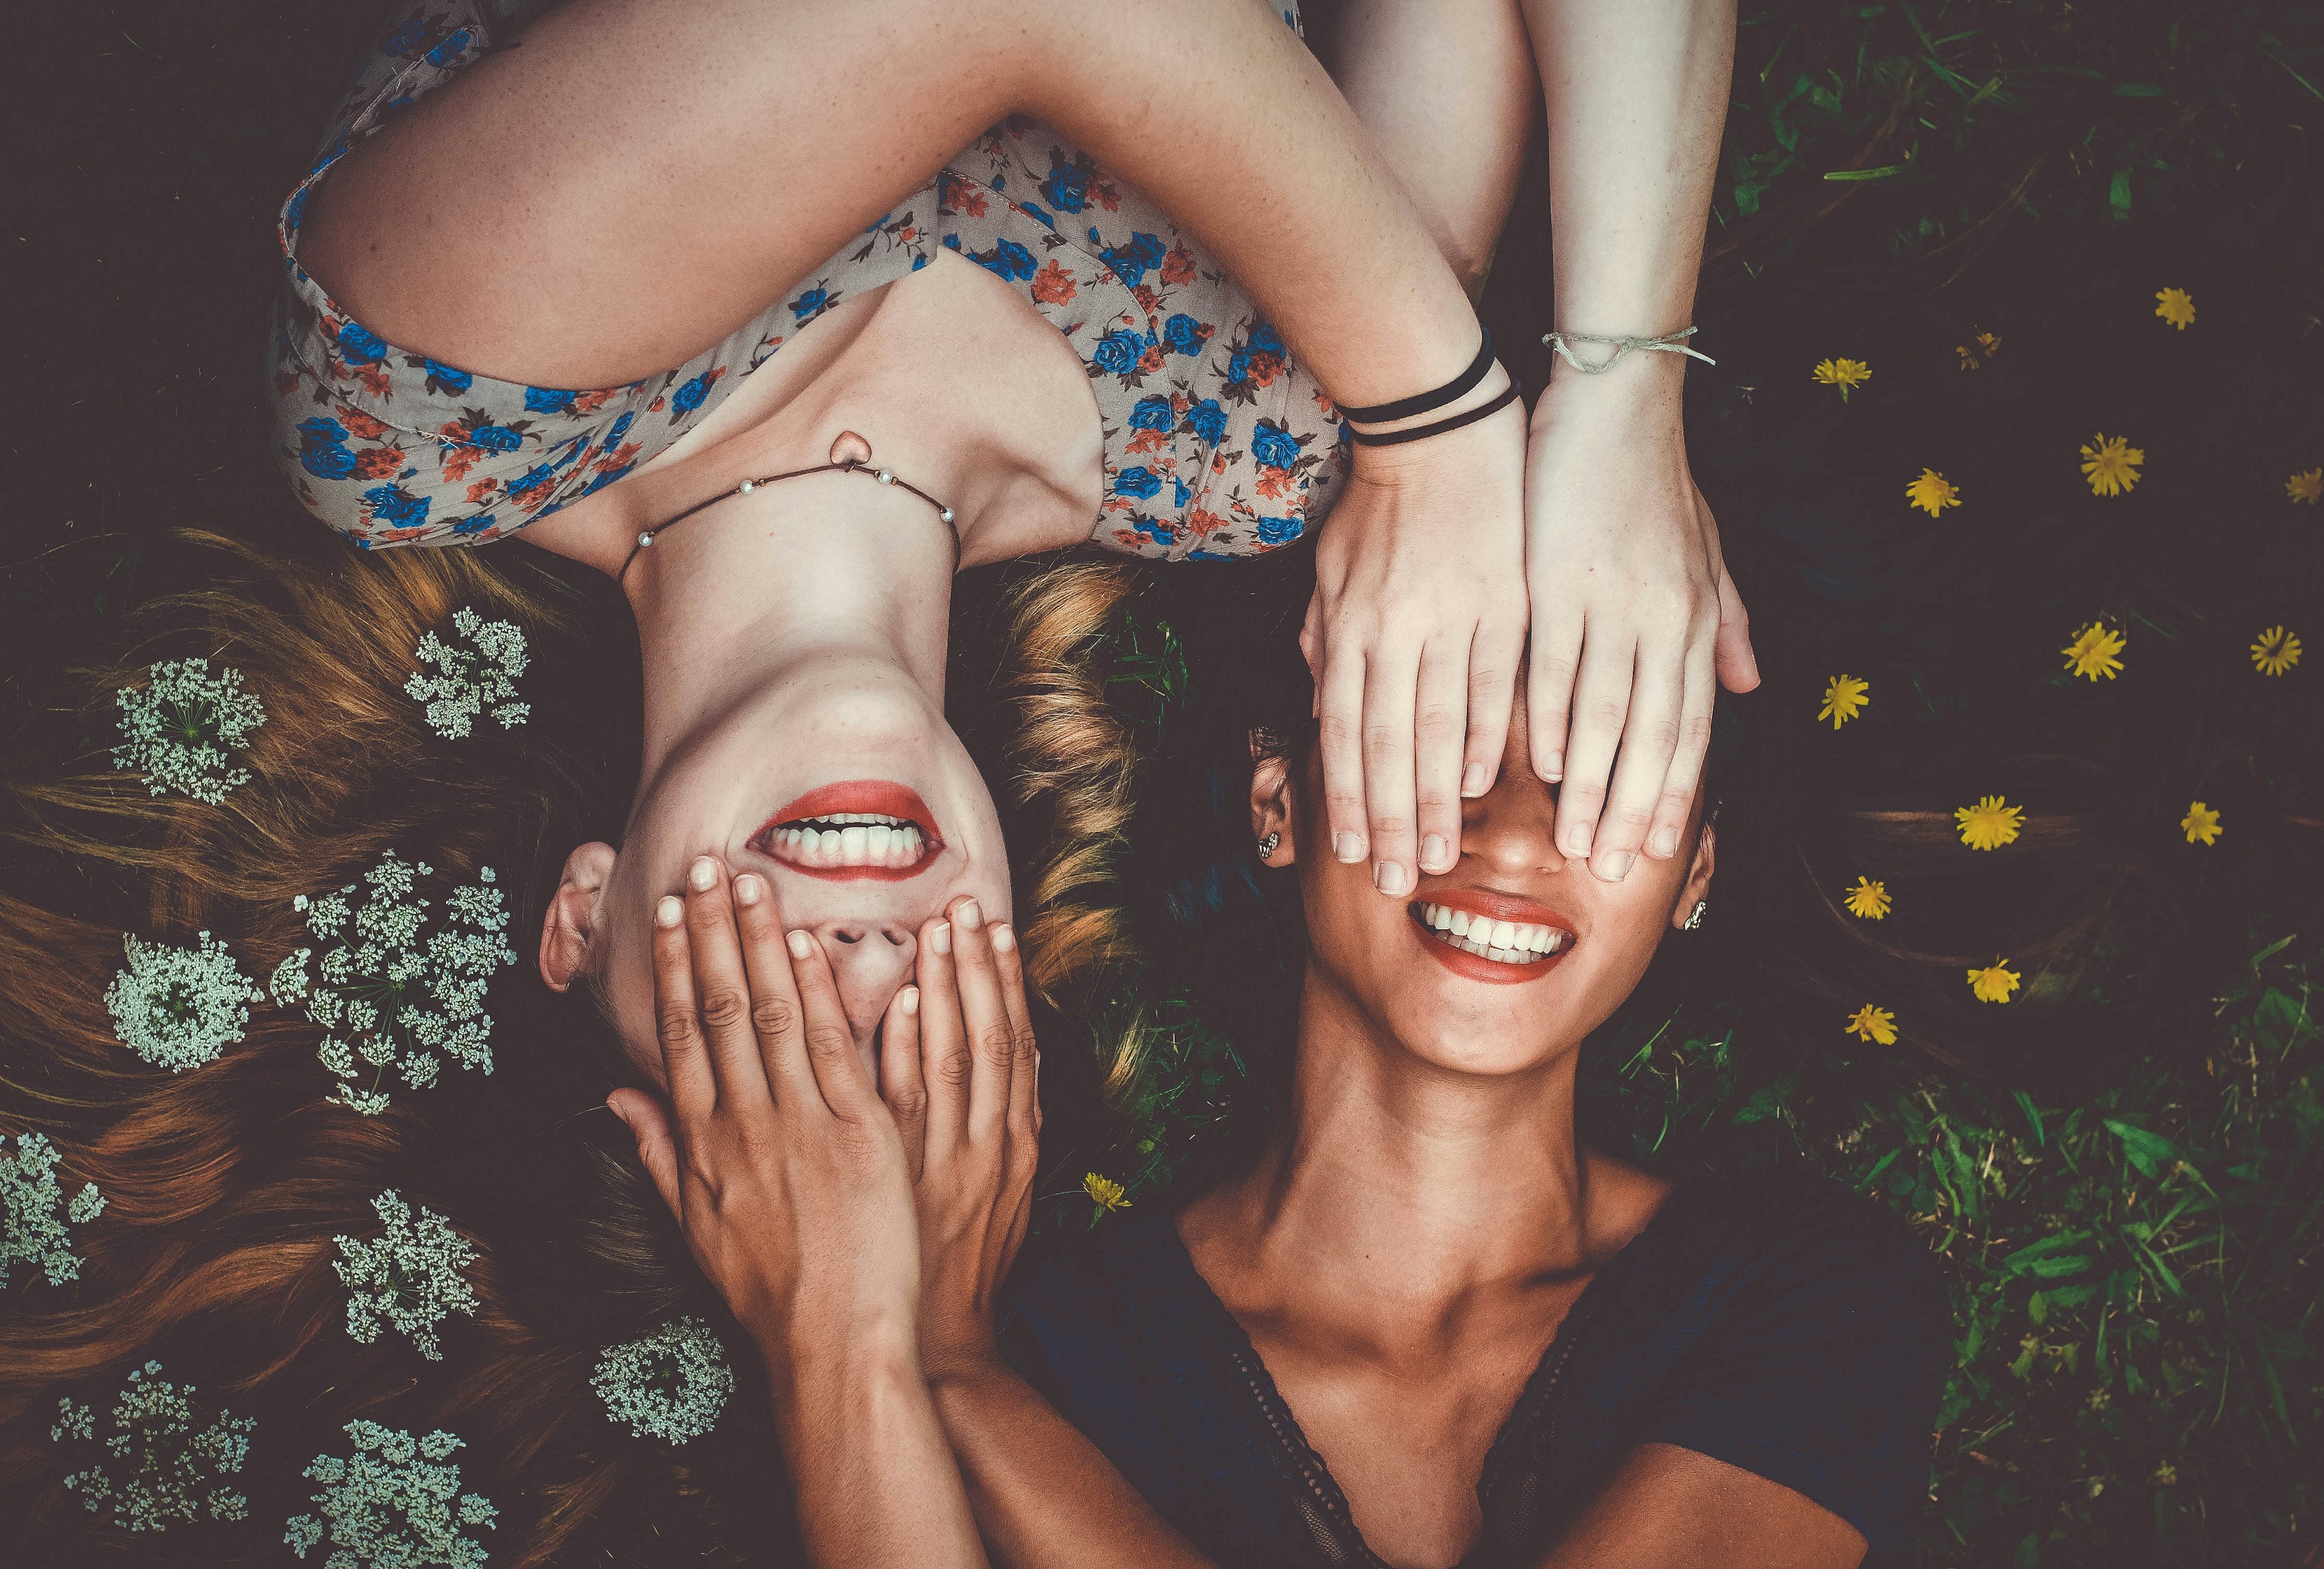 two women smiling and covering each other's eyes